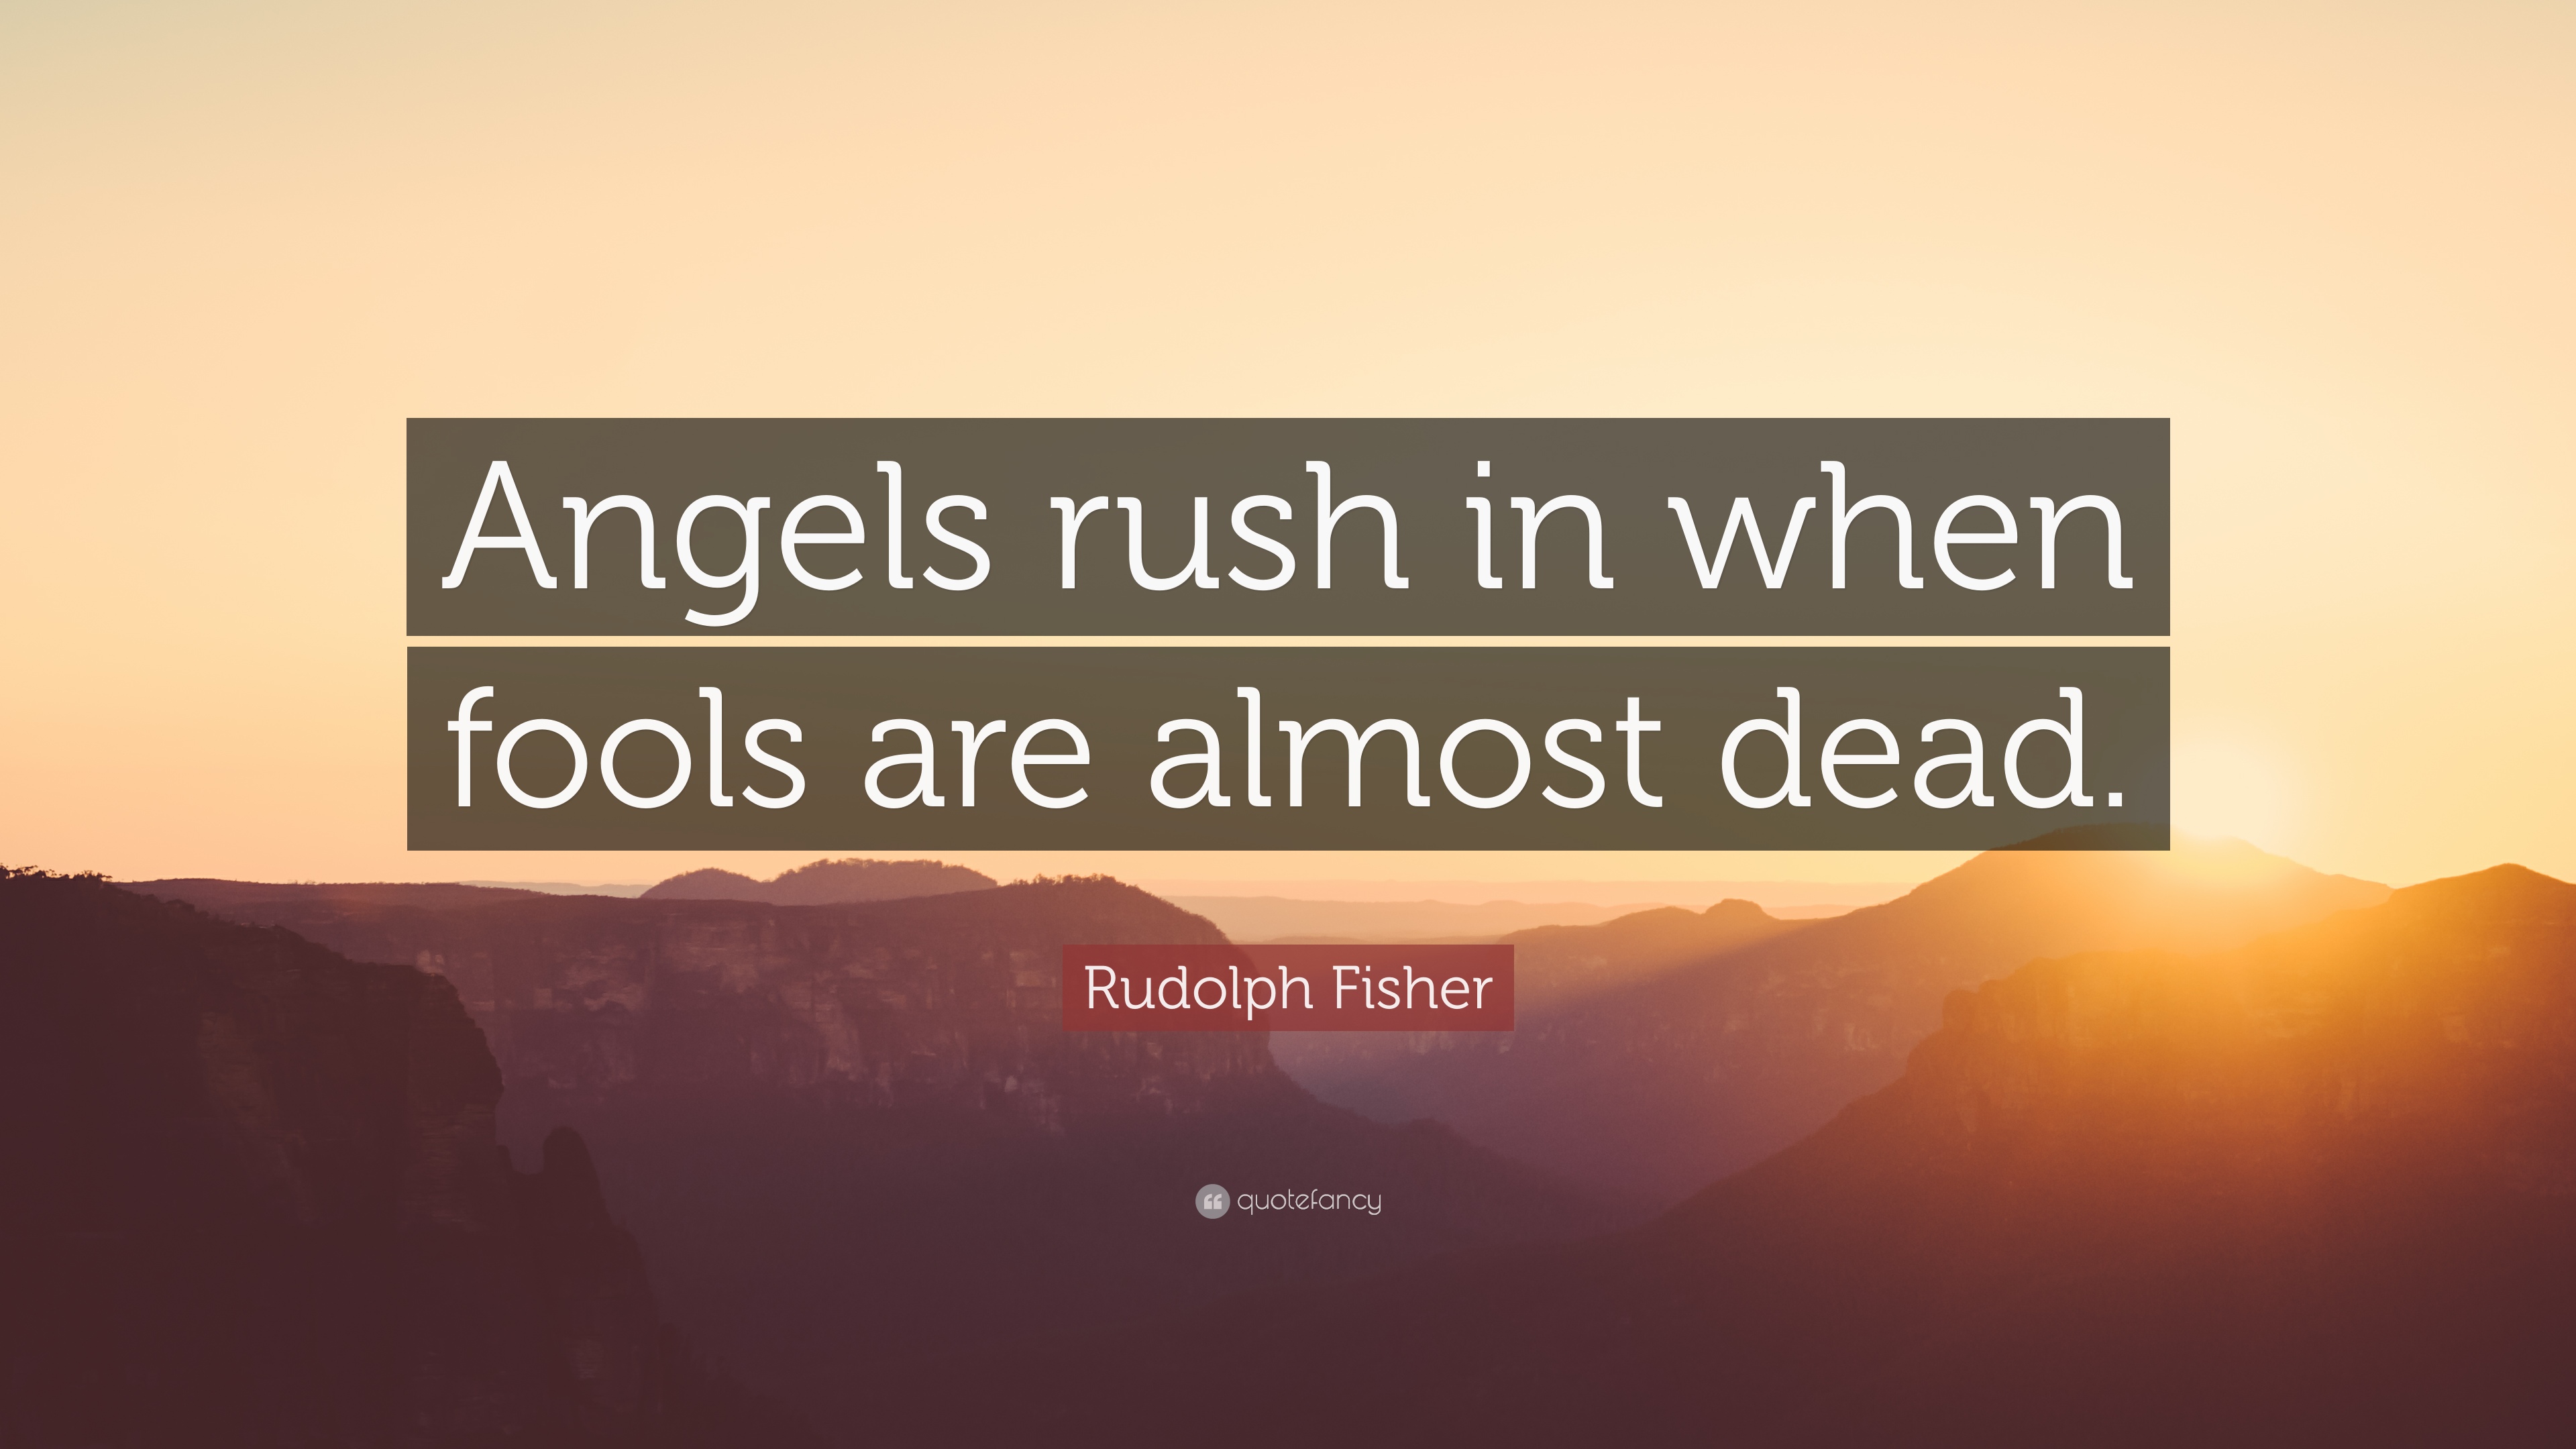 Rudolph Fisher Quote: “Angels rush in when fools are almost dead ...